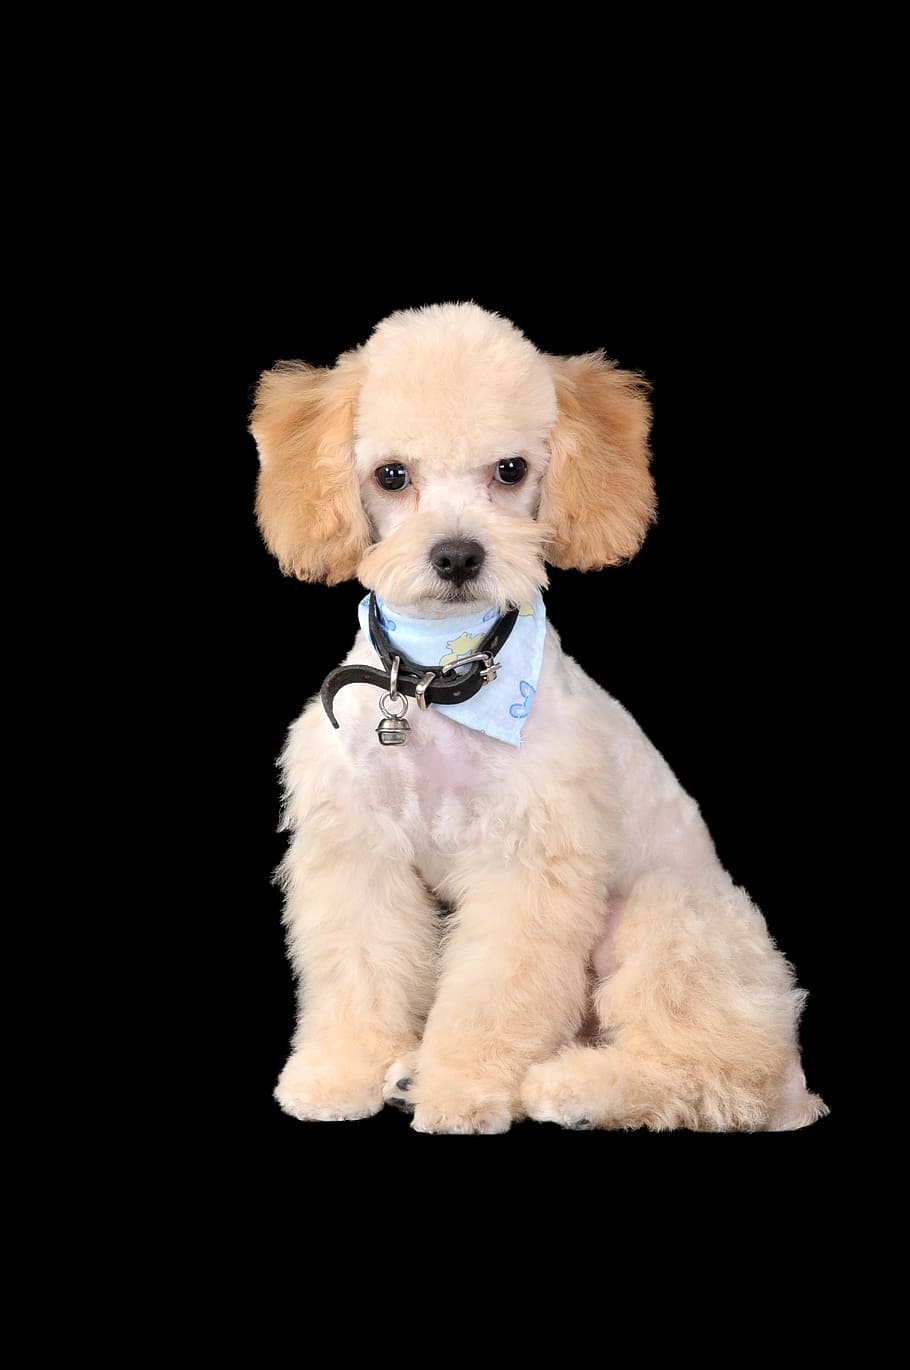 poodle, dogs, puppies, canine, dog, one animal, domestic, pets, mammal, domestic animals